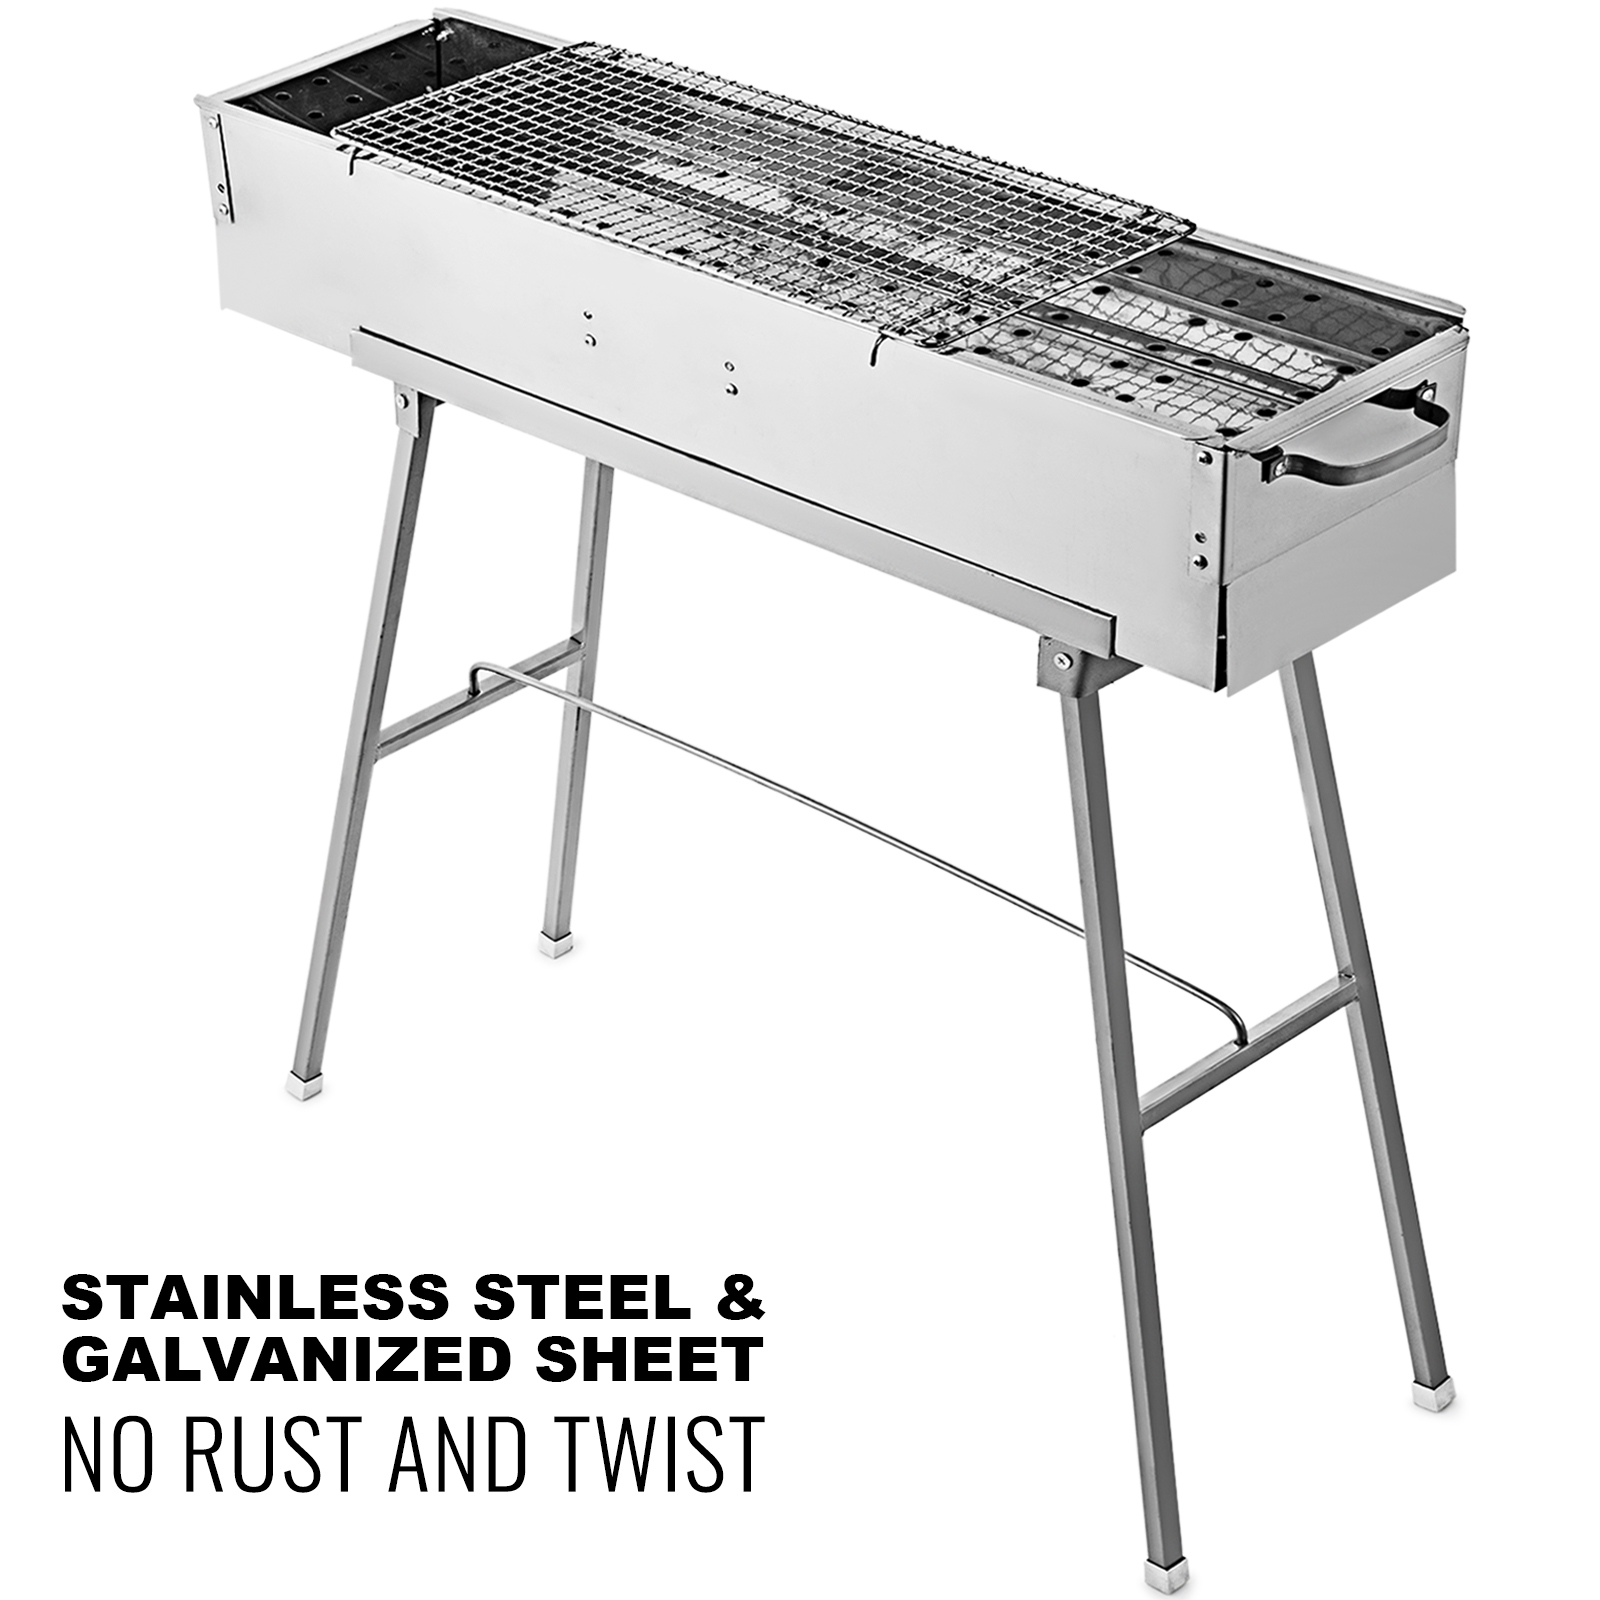 Large Foldable Stainless Steel BBQ Grill Charcoal Outdoor Camping Patio Picnic 